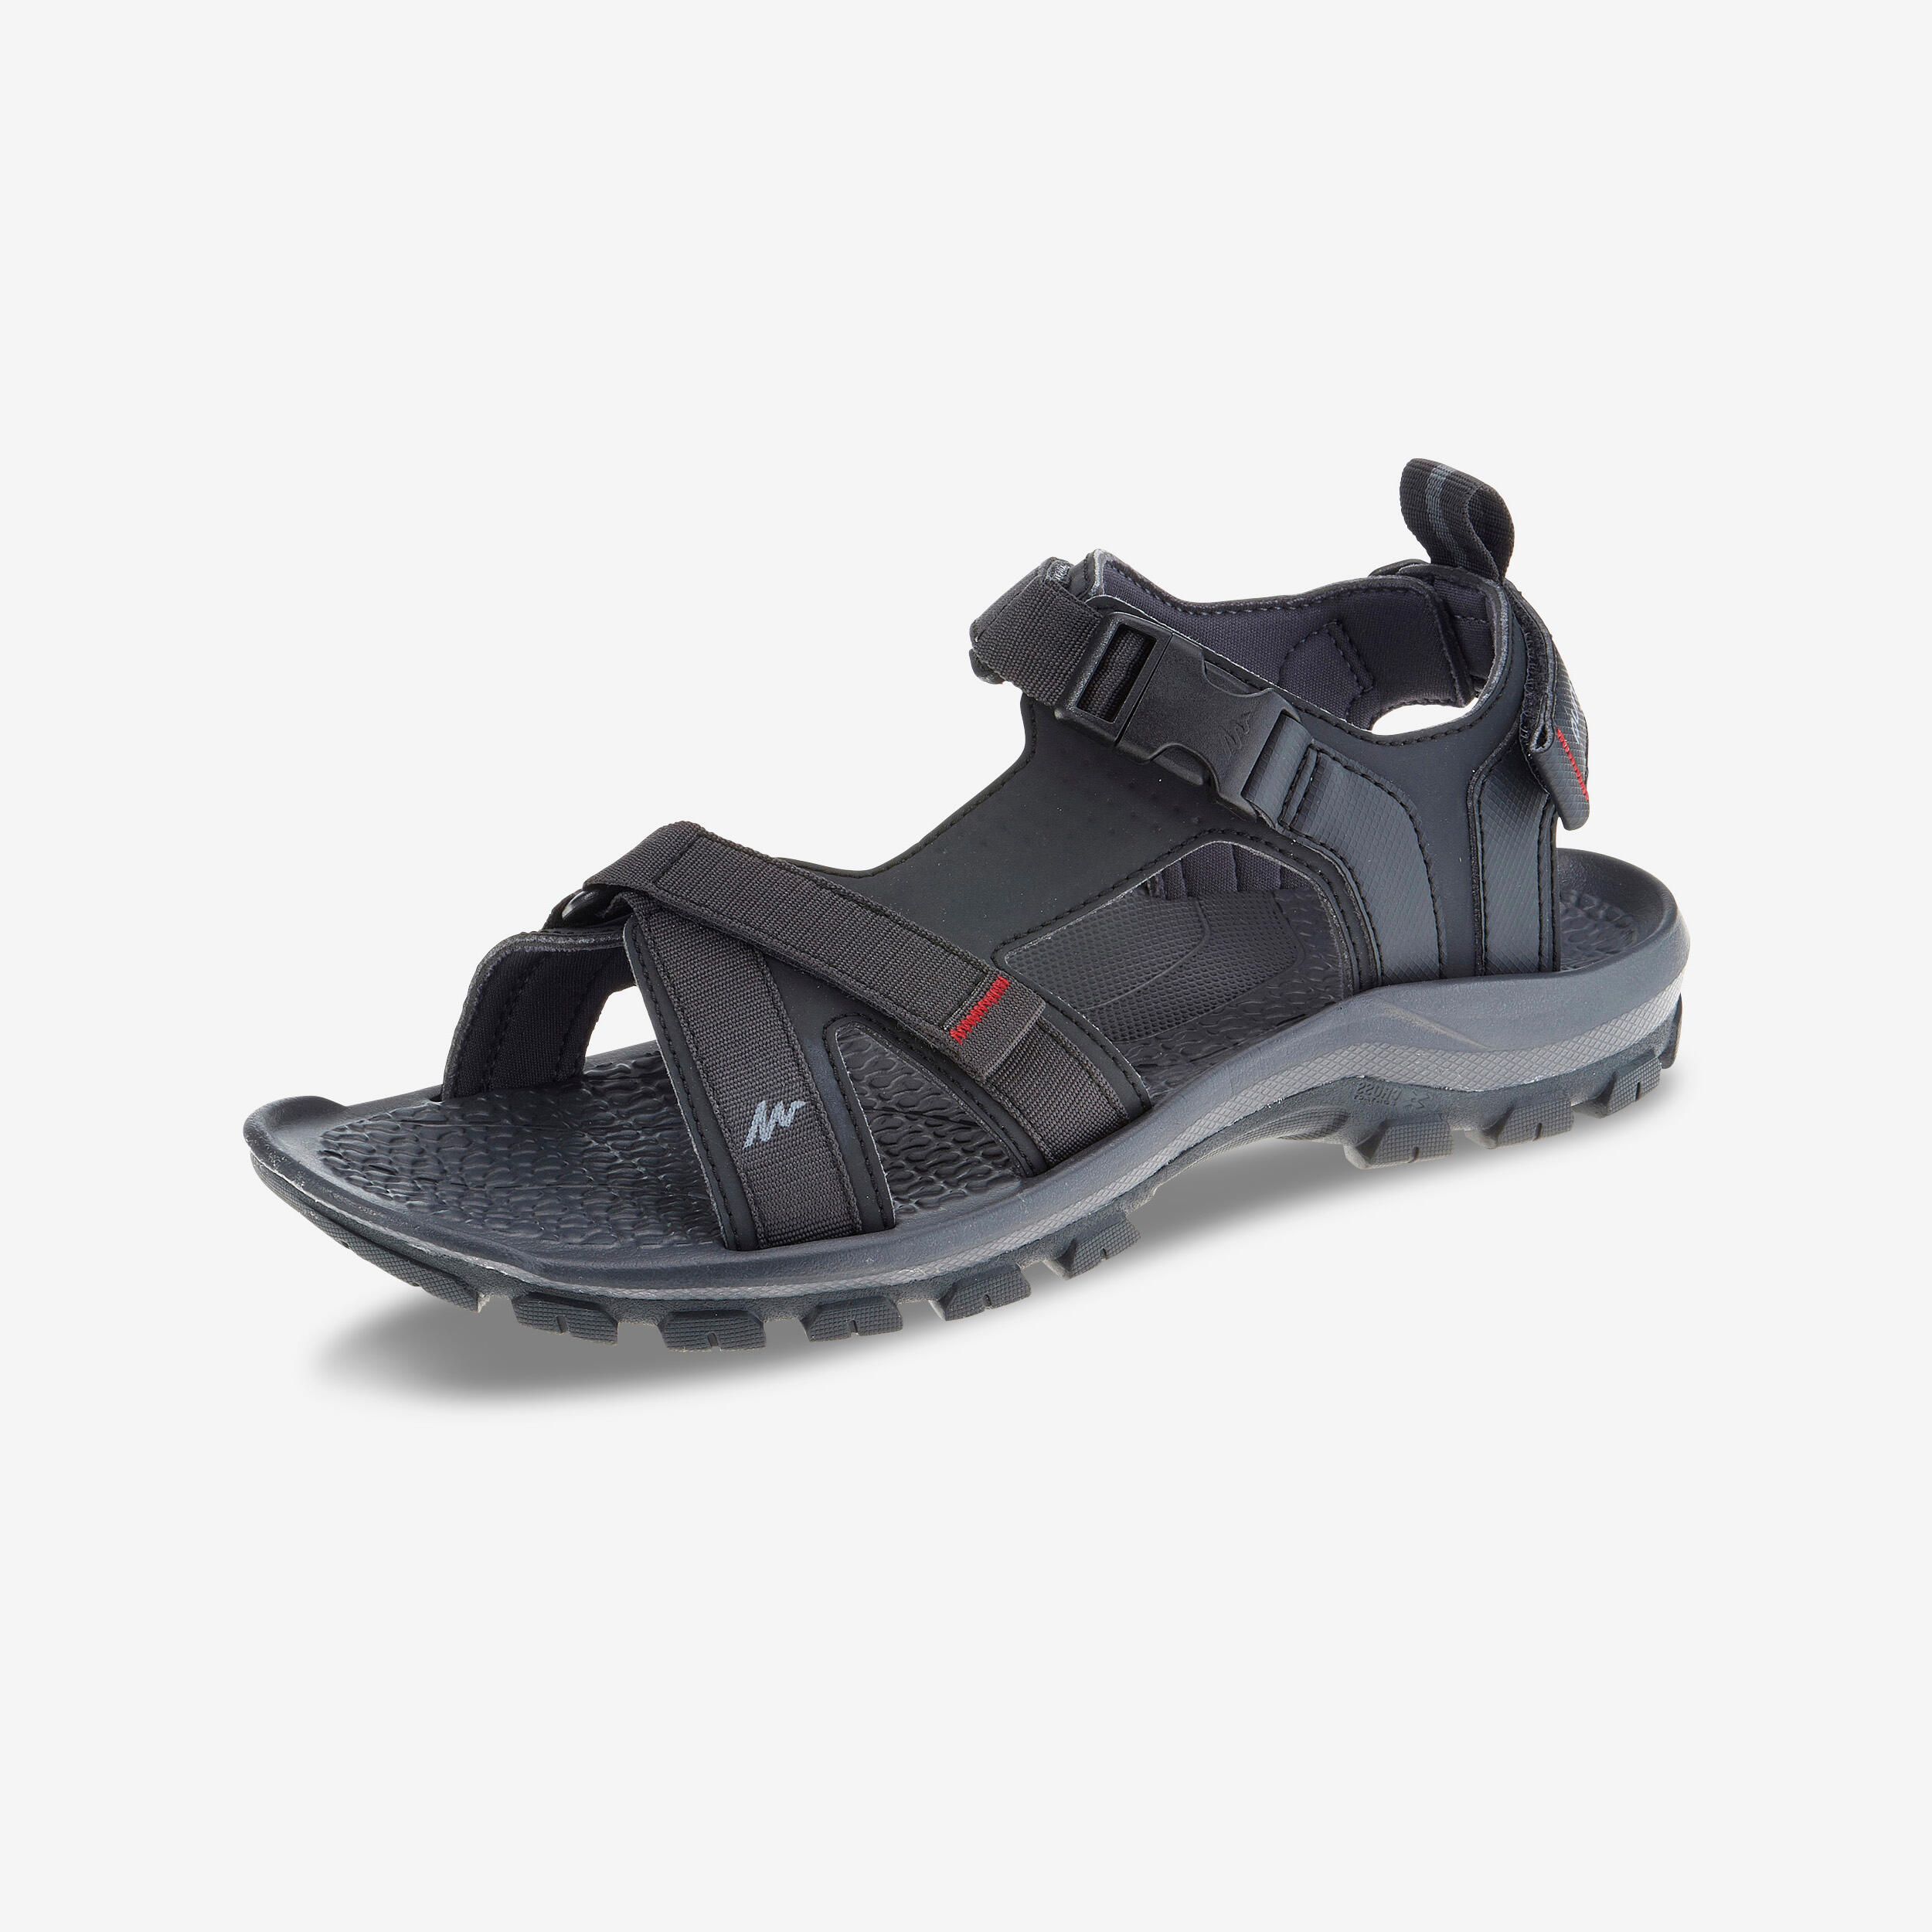 Columbia Kea II flip flop review: grippy and cushioned sandals for walking  | T3